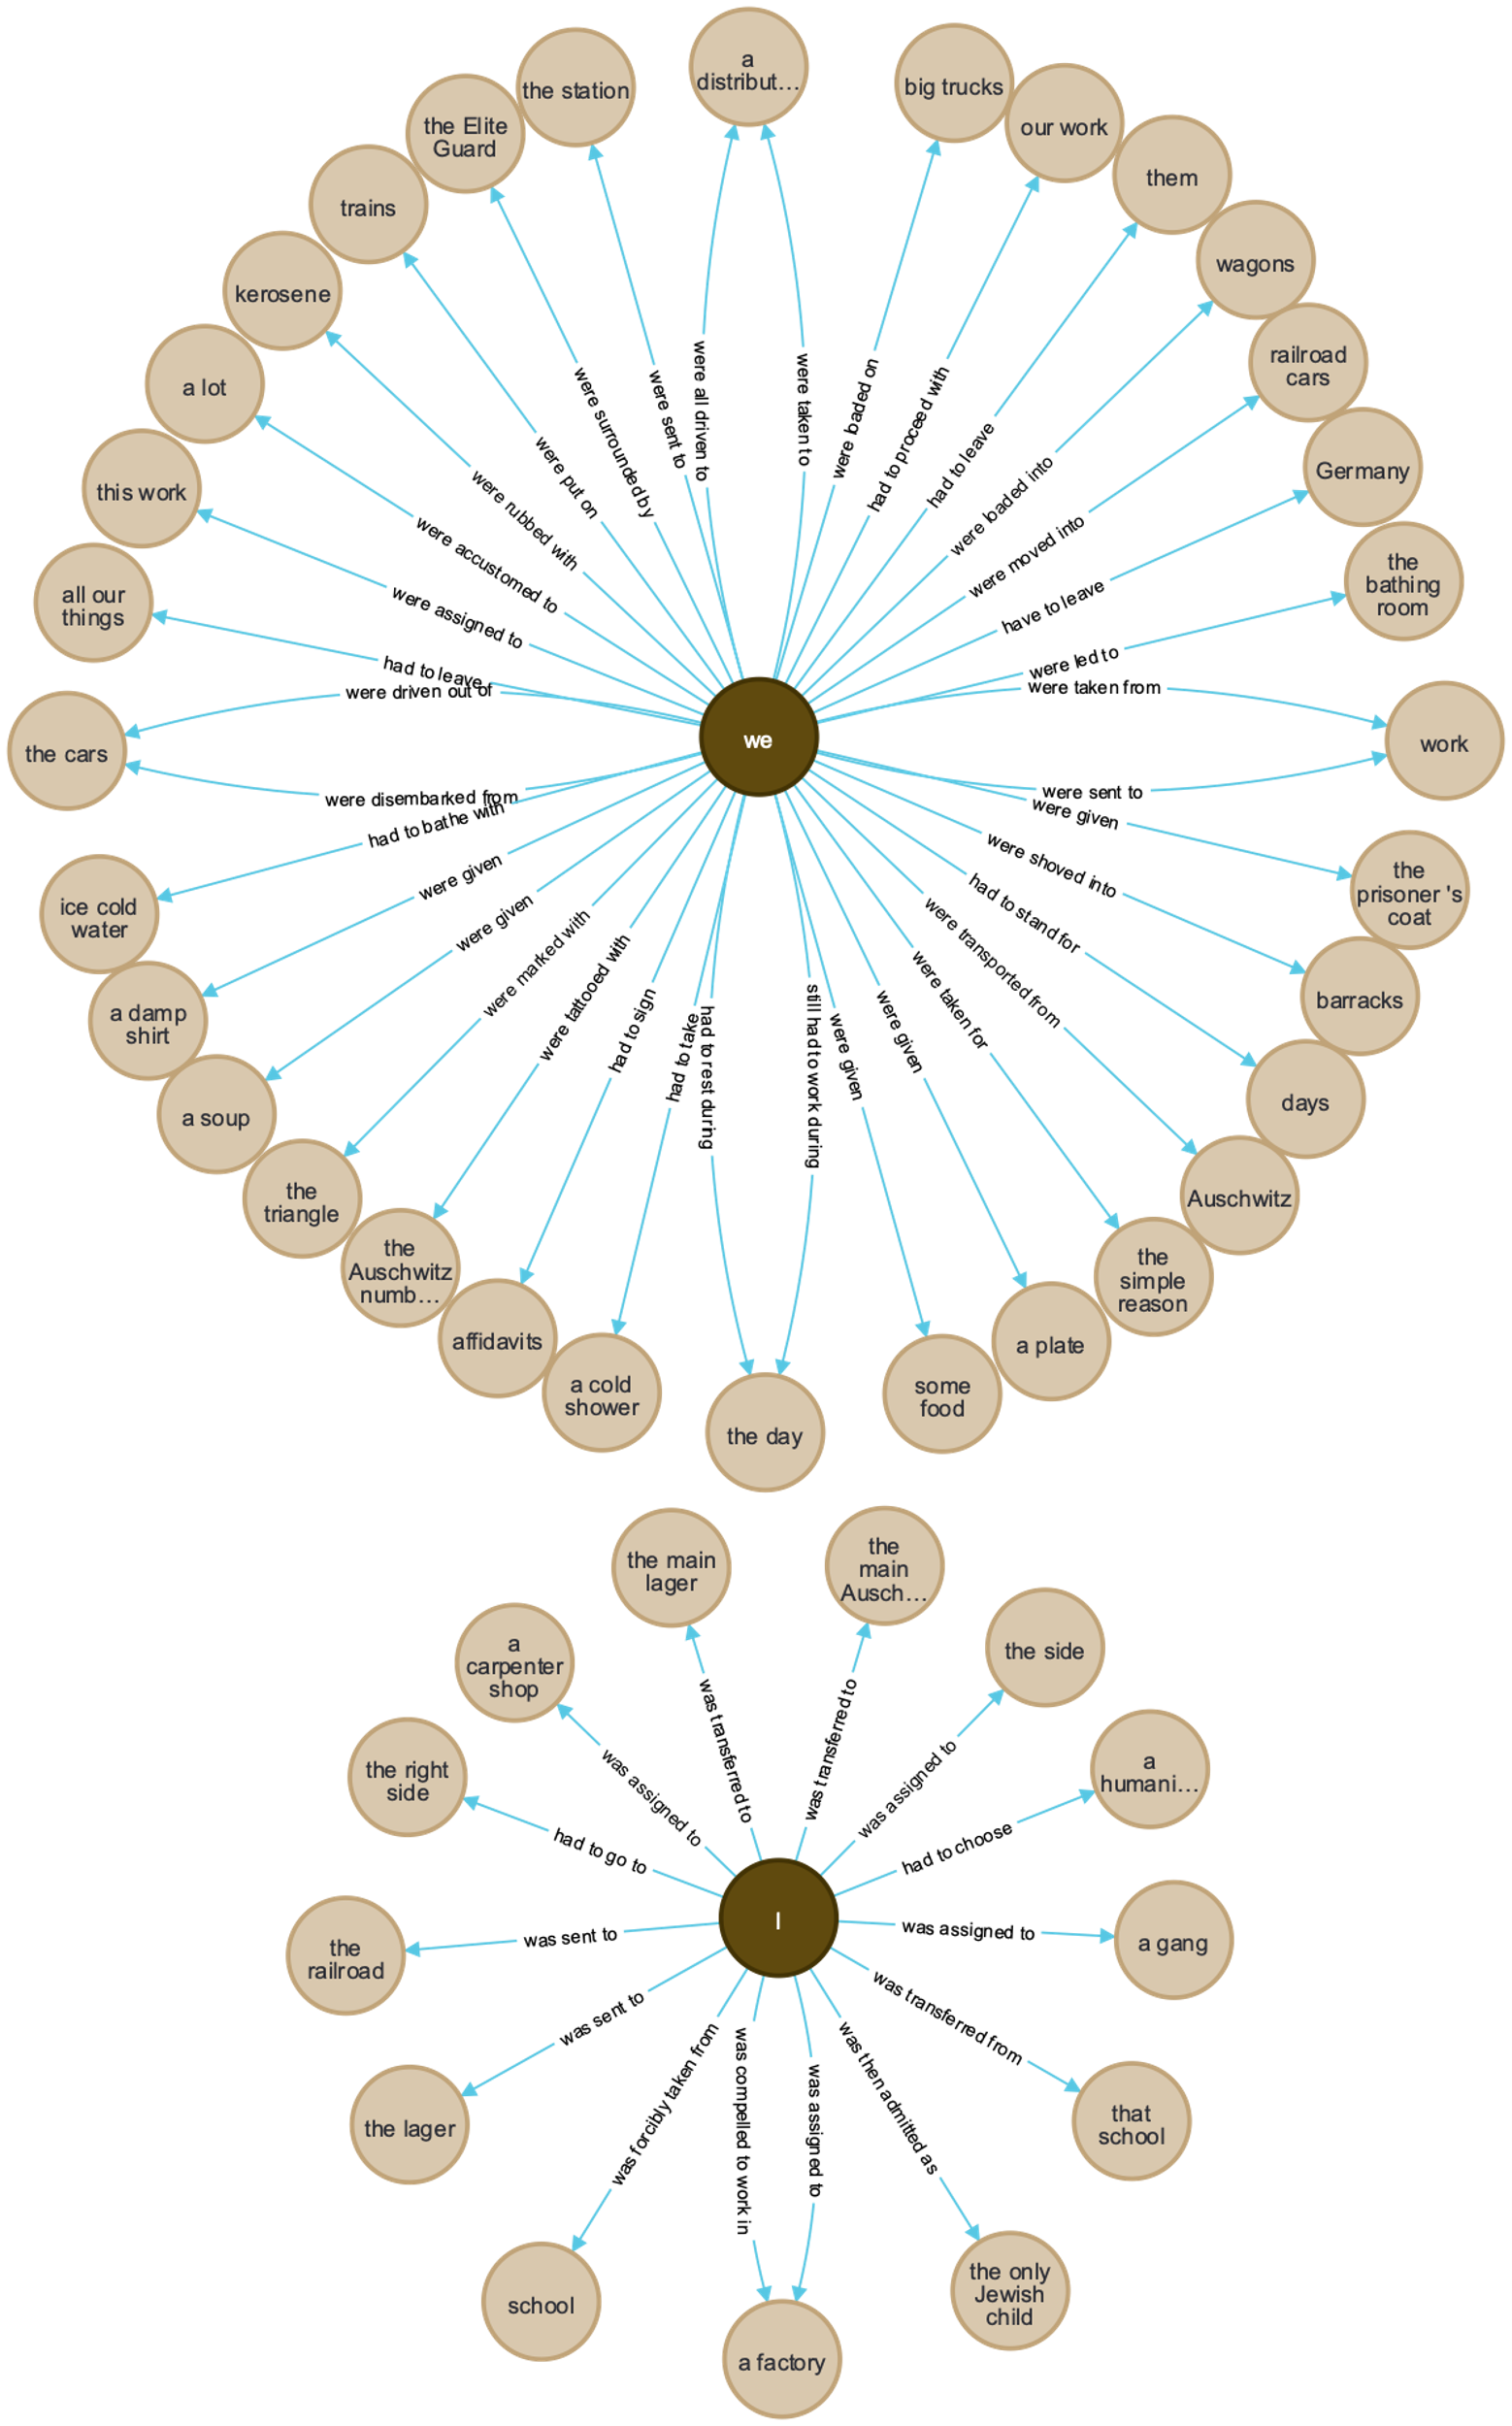 Two branching circle-shaped diagrams of sentences from Boder's interview of Bassfreund, where we and I from the center of two separate branched diagrams. Radiating out from the centers are blue arrows labeled with verb chunks. The blue arrows point to corresponding noun chunks. For example, one sentence reads: “we” (center, subject) / “were shoved into” (blue arrow) / “barracks” (object noun chunk).